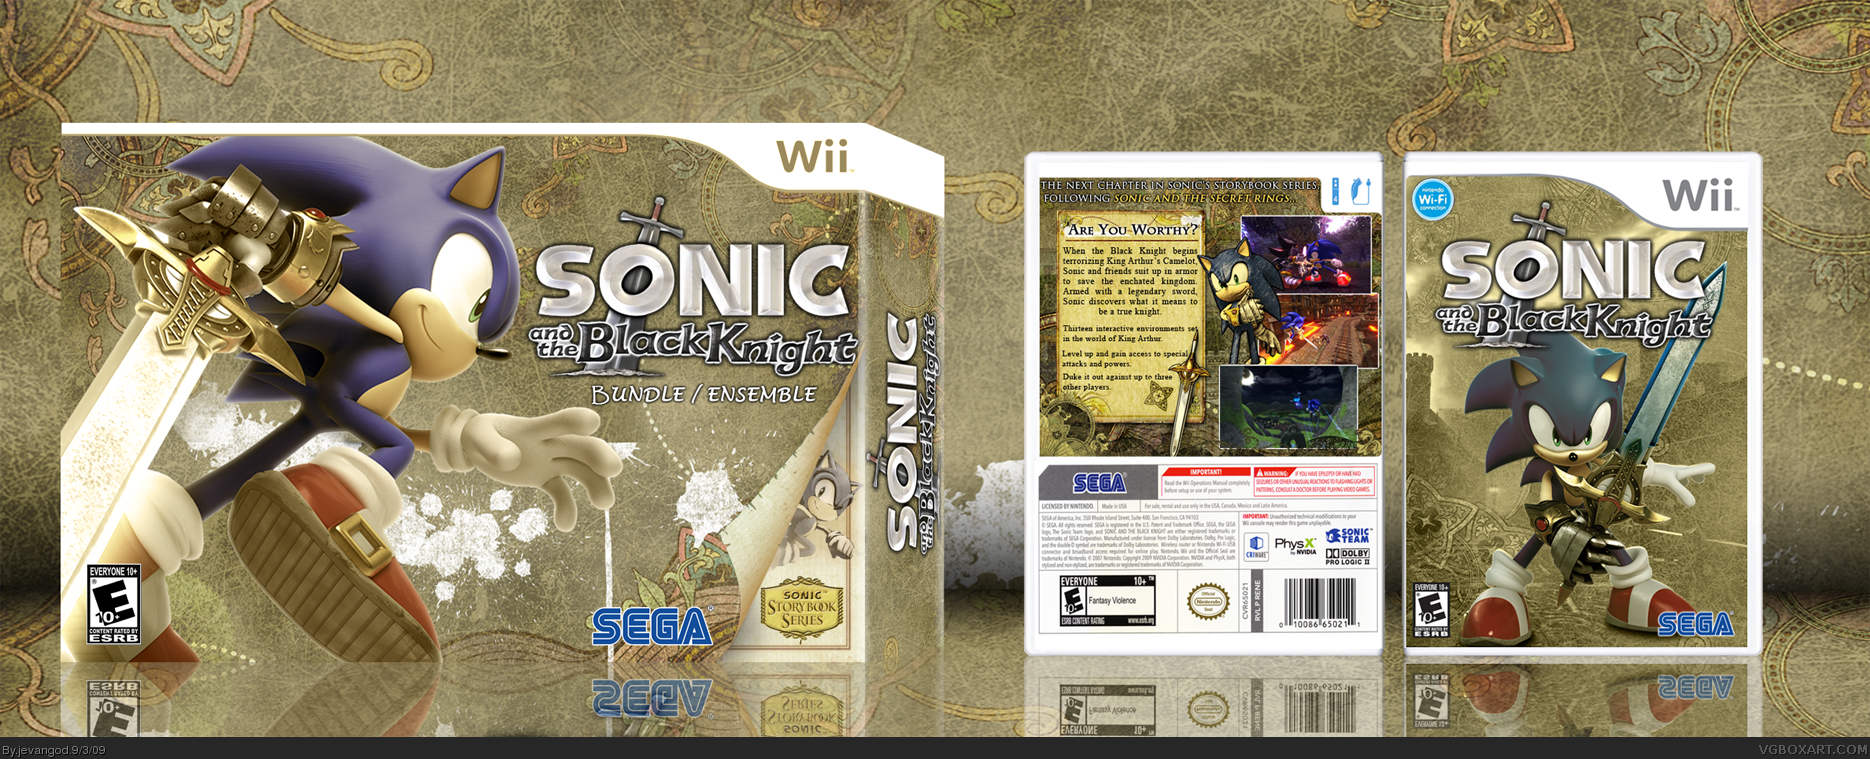 Sonic and the Black Knight Bundle box cover